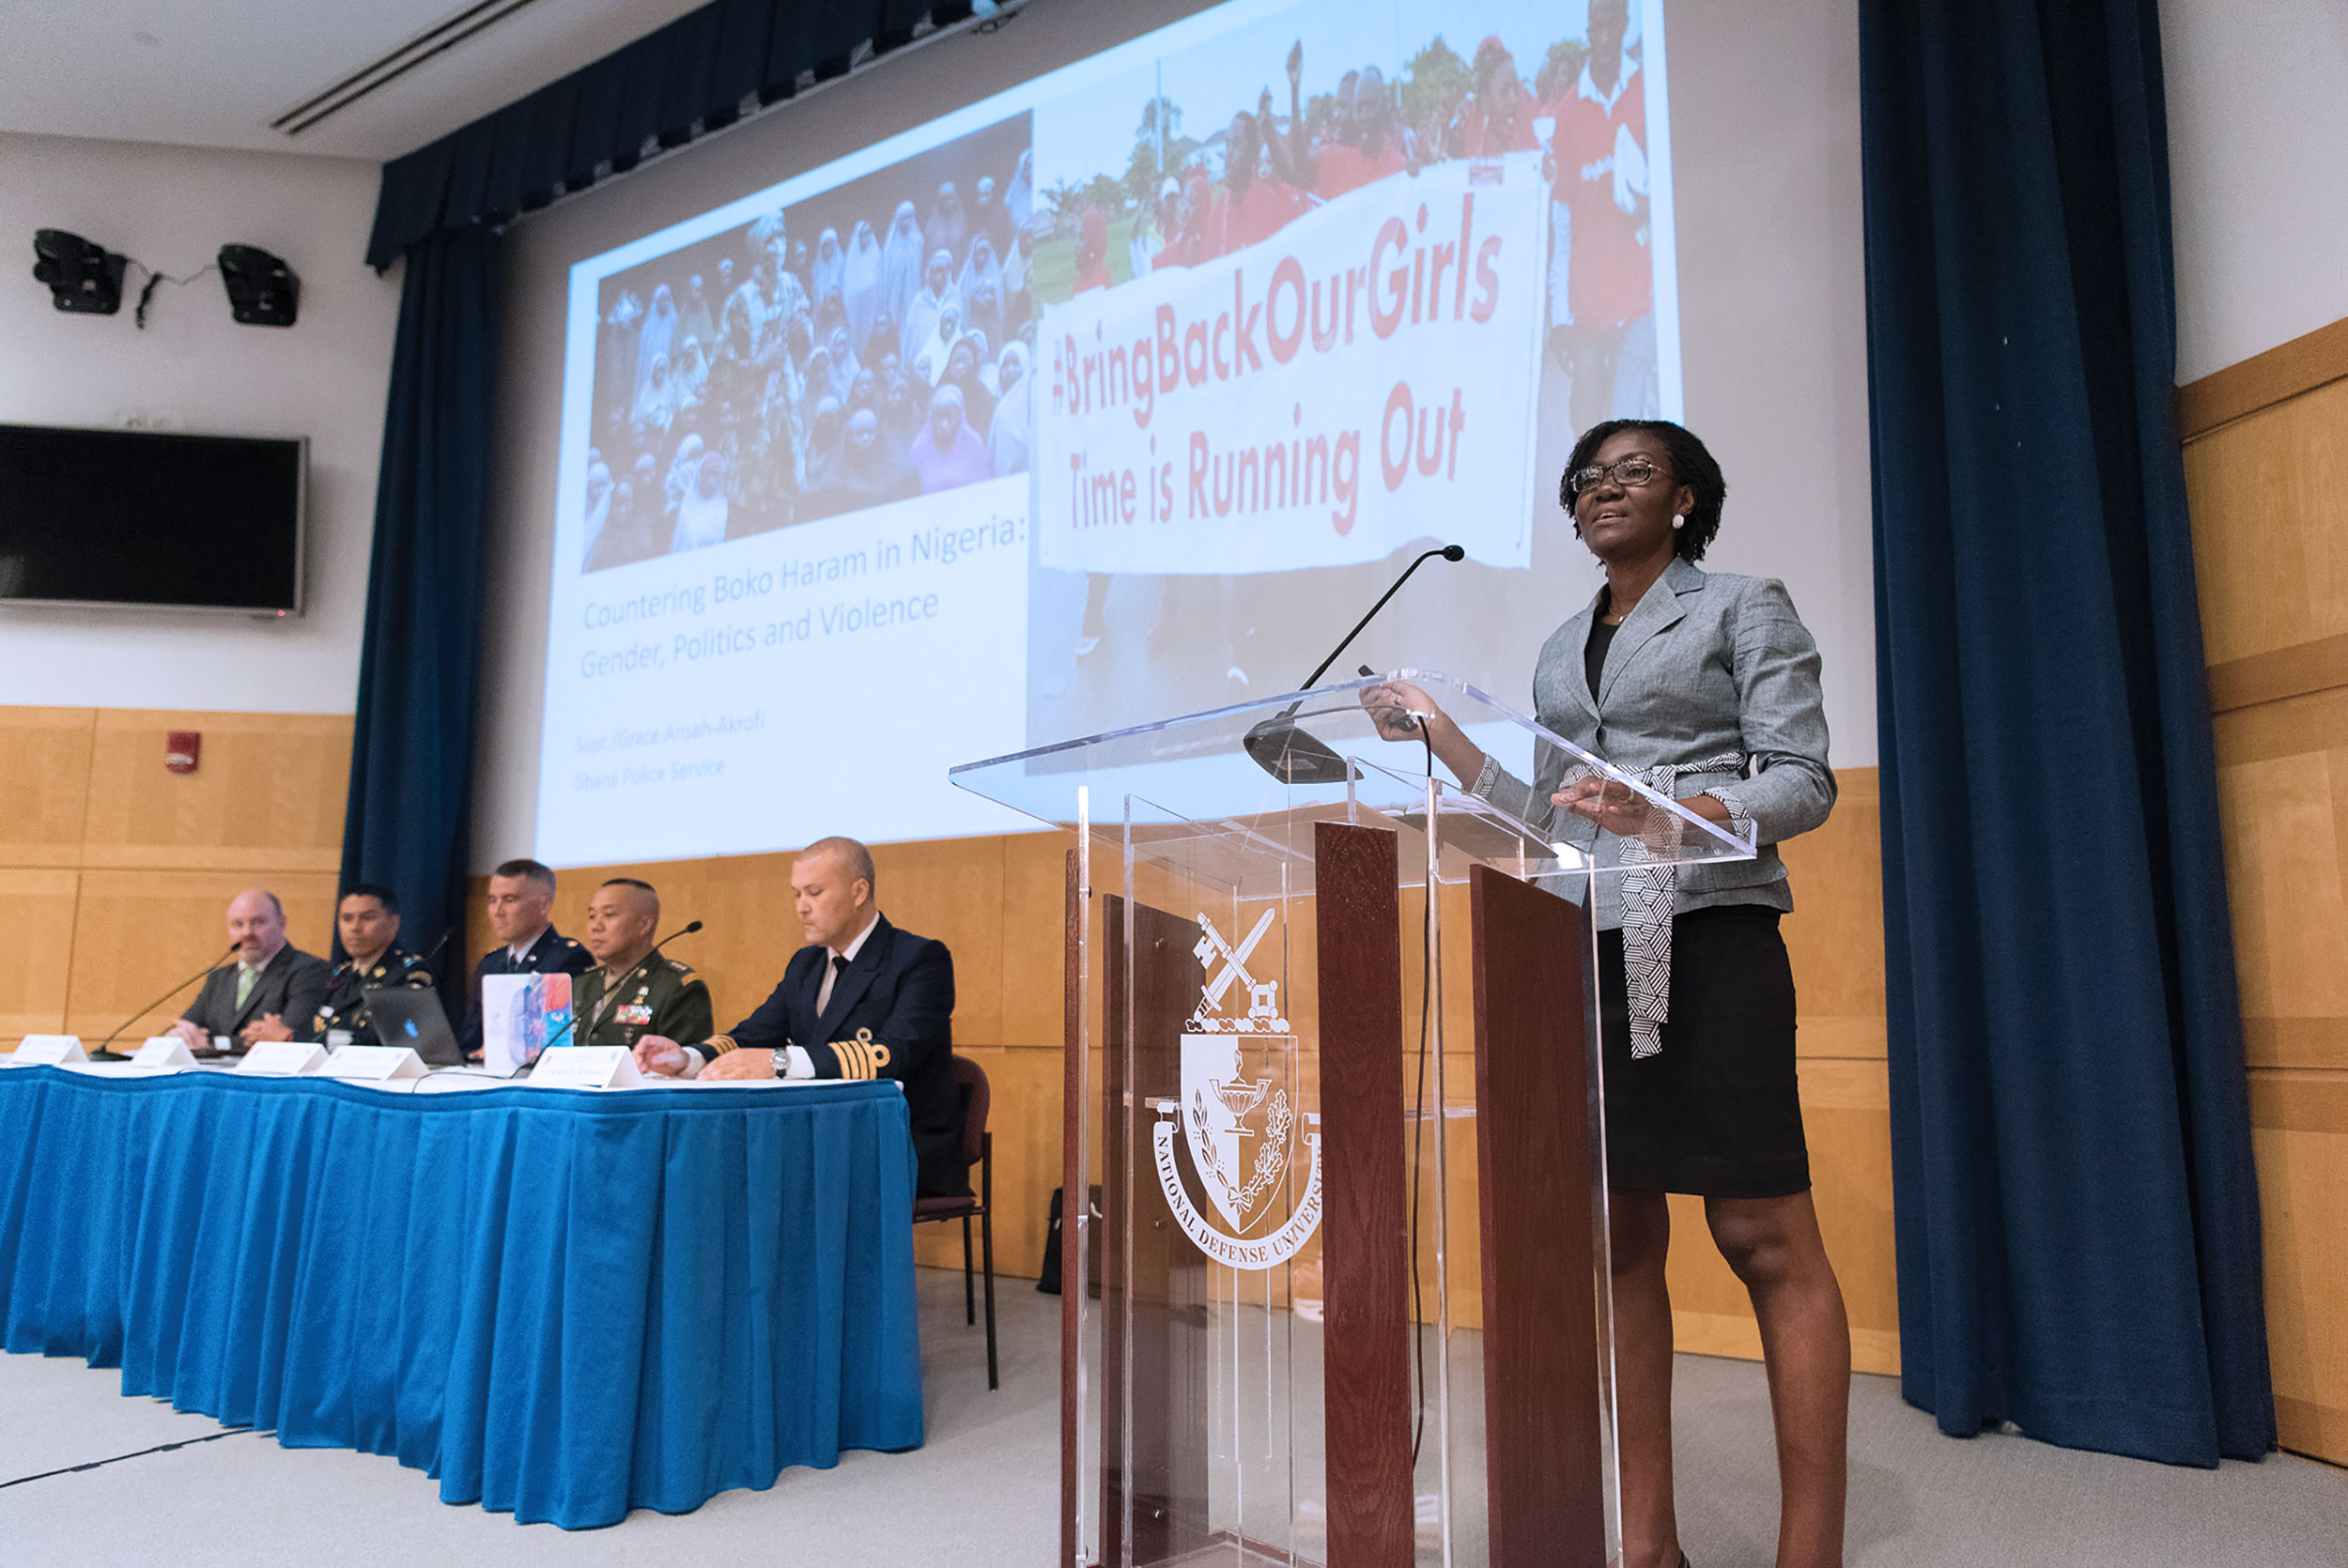 National Defense University’s College of International Security Affairs hosts its annual Thesis Symposium, where students from Class of 2019 present their theses to faculty and fellow students